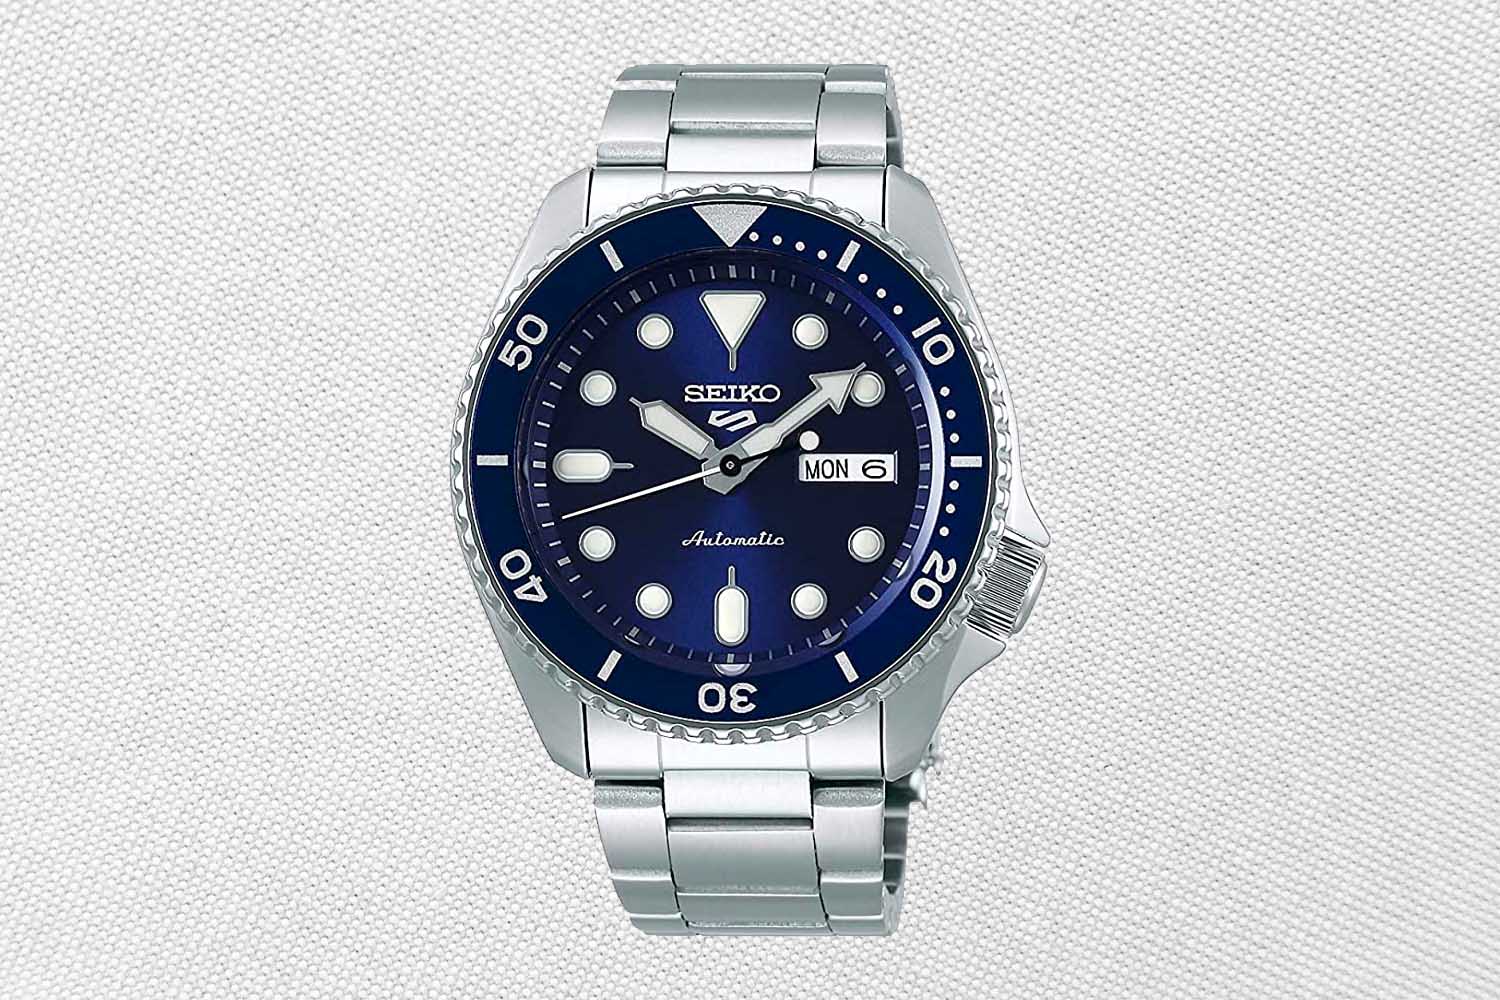 Seiko 5 Sports Watch, one of the best watches under $1,000